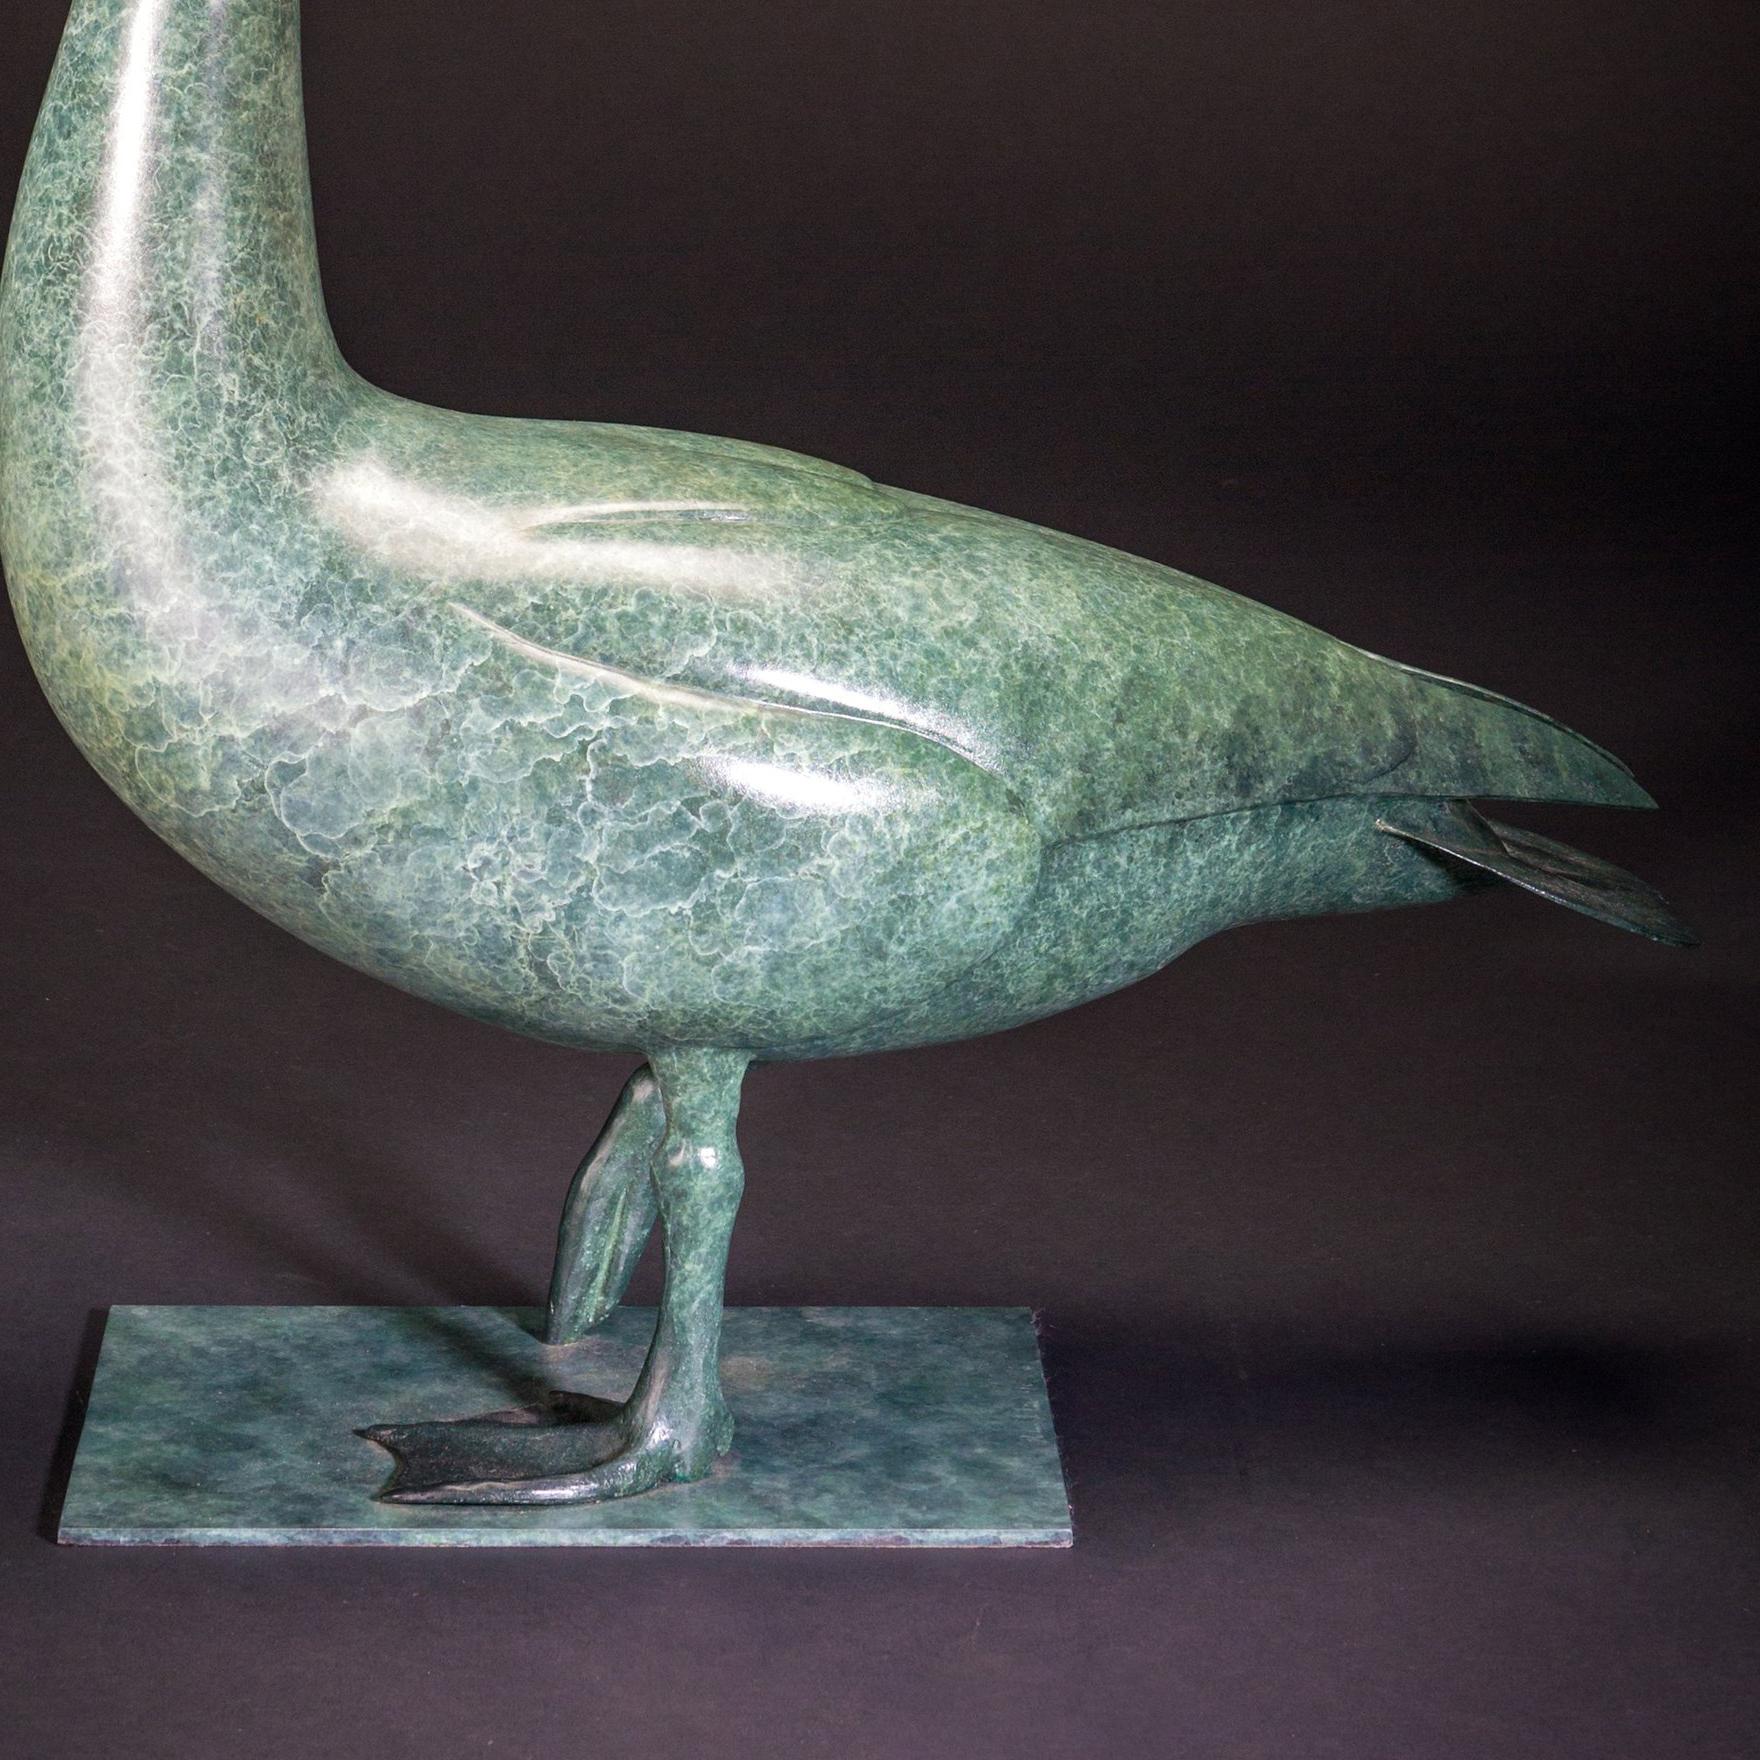 'Goose' is a stunning sculpture full of character. As a gamekeeper, Richard Smith understands and loves the animal he sculpts - he lives and breathes nature!

Richard Smith has gained an international reputation for his works of art, he has